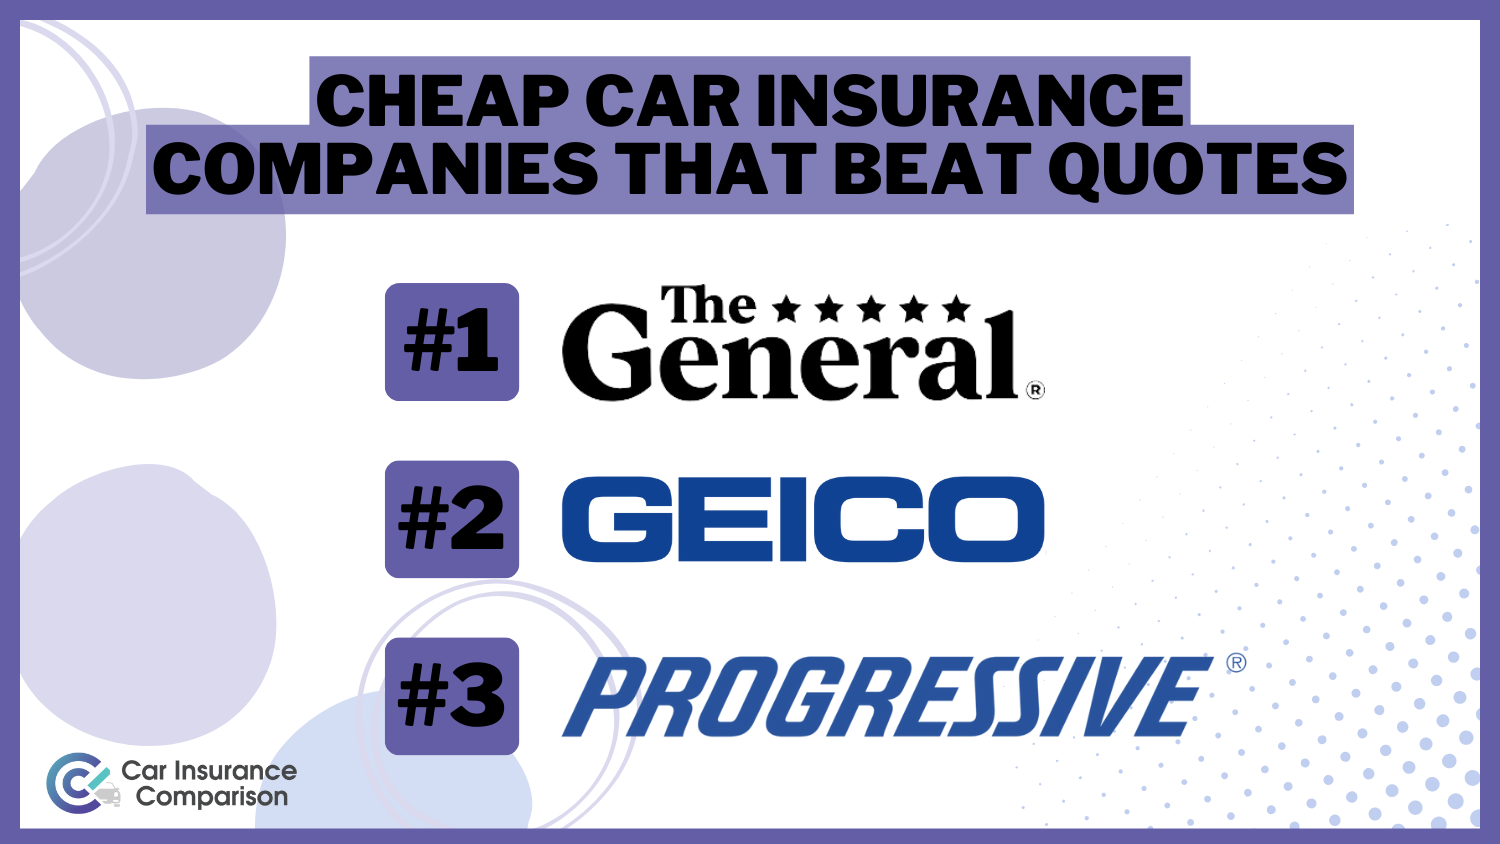 Cheap Car Insurance Companies That Beat Quotes: The General, Geico, and Progressive